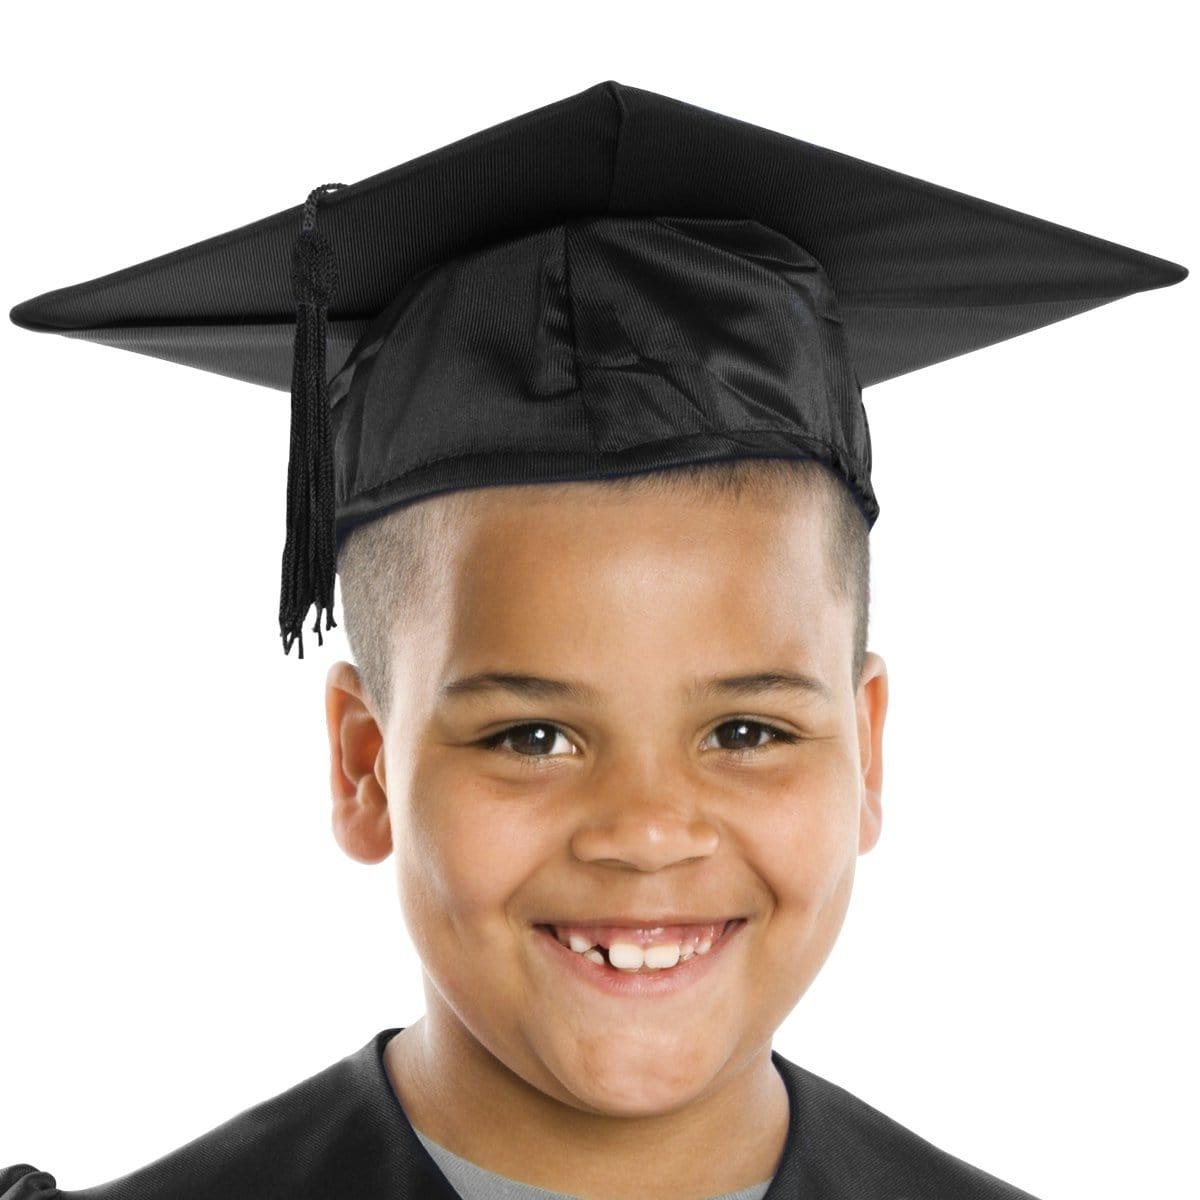 Buy Graduation Black graduation hat with tassel for kids sold at Party Expert